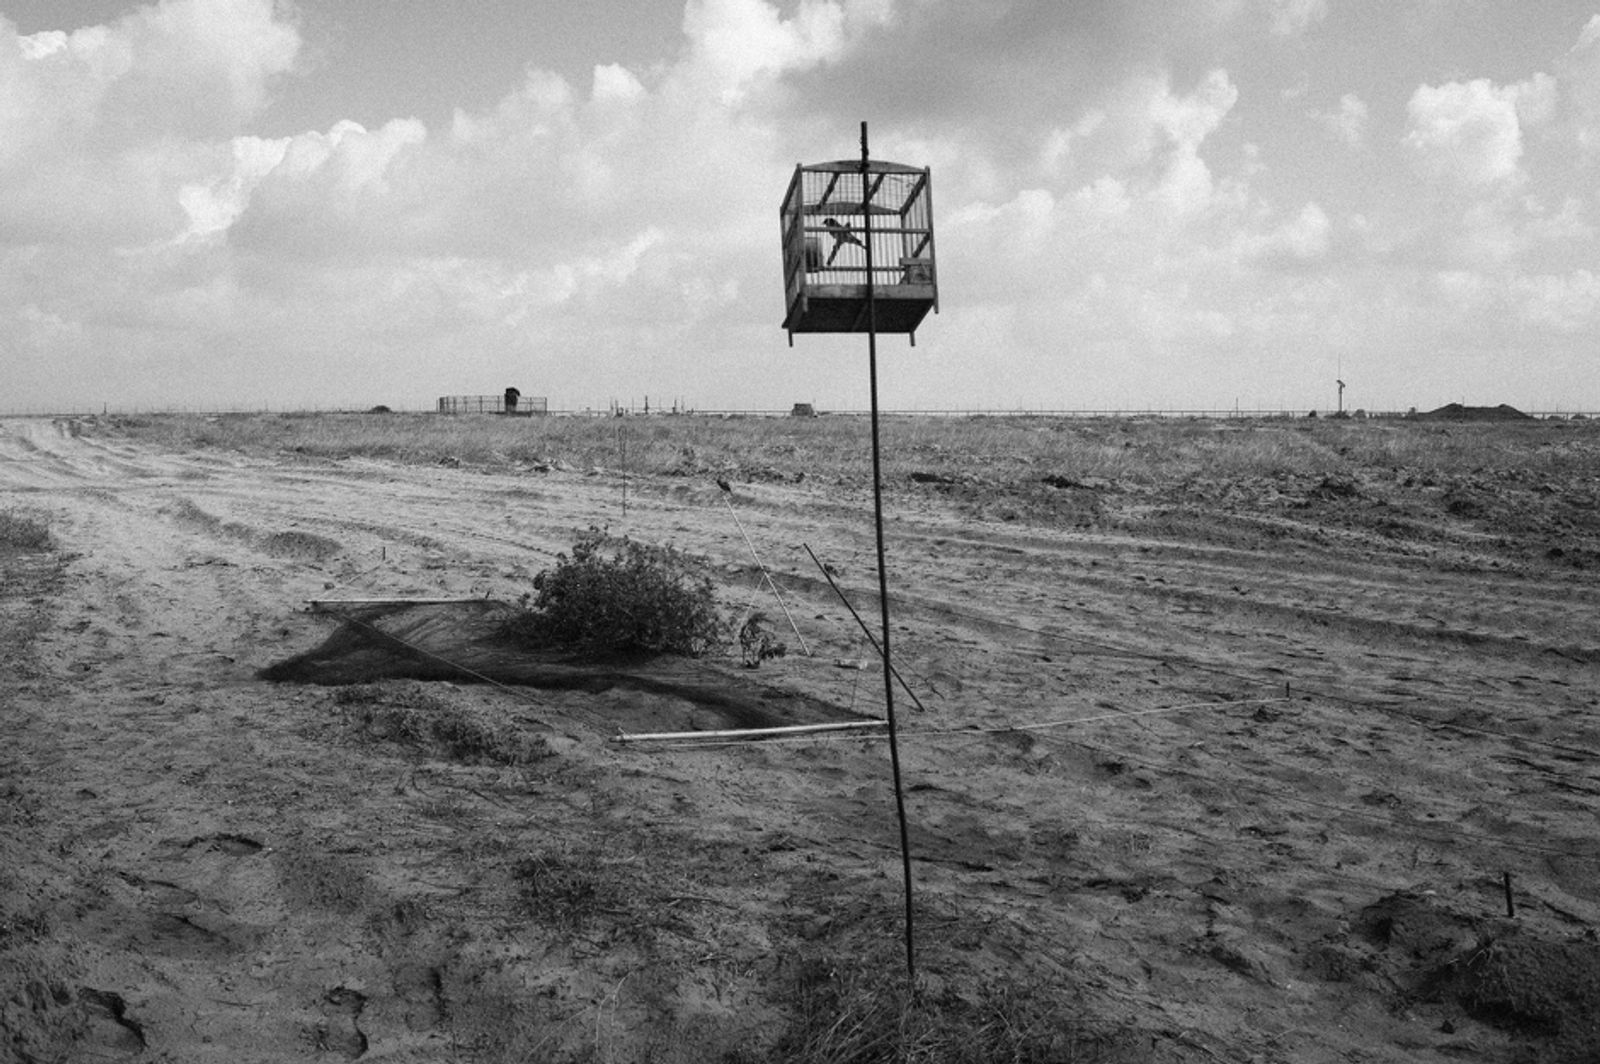 © Jost Franko - Image from the Farming in Gaza - Aftermath of war photography project